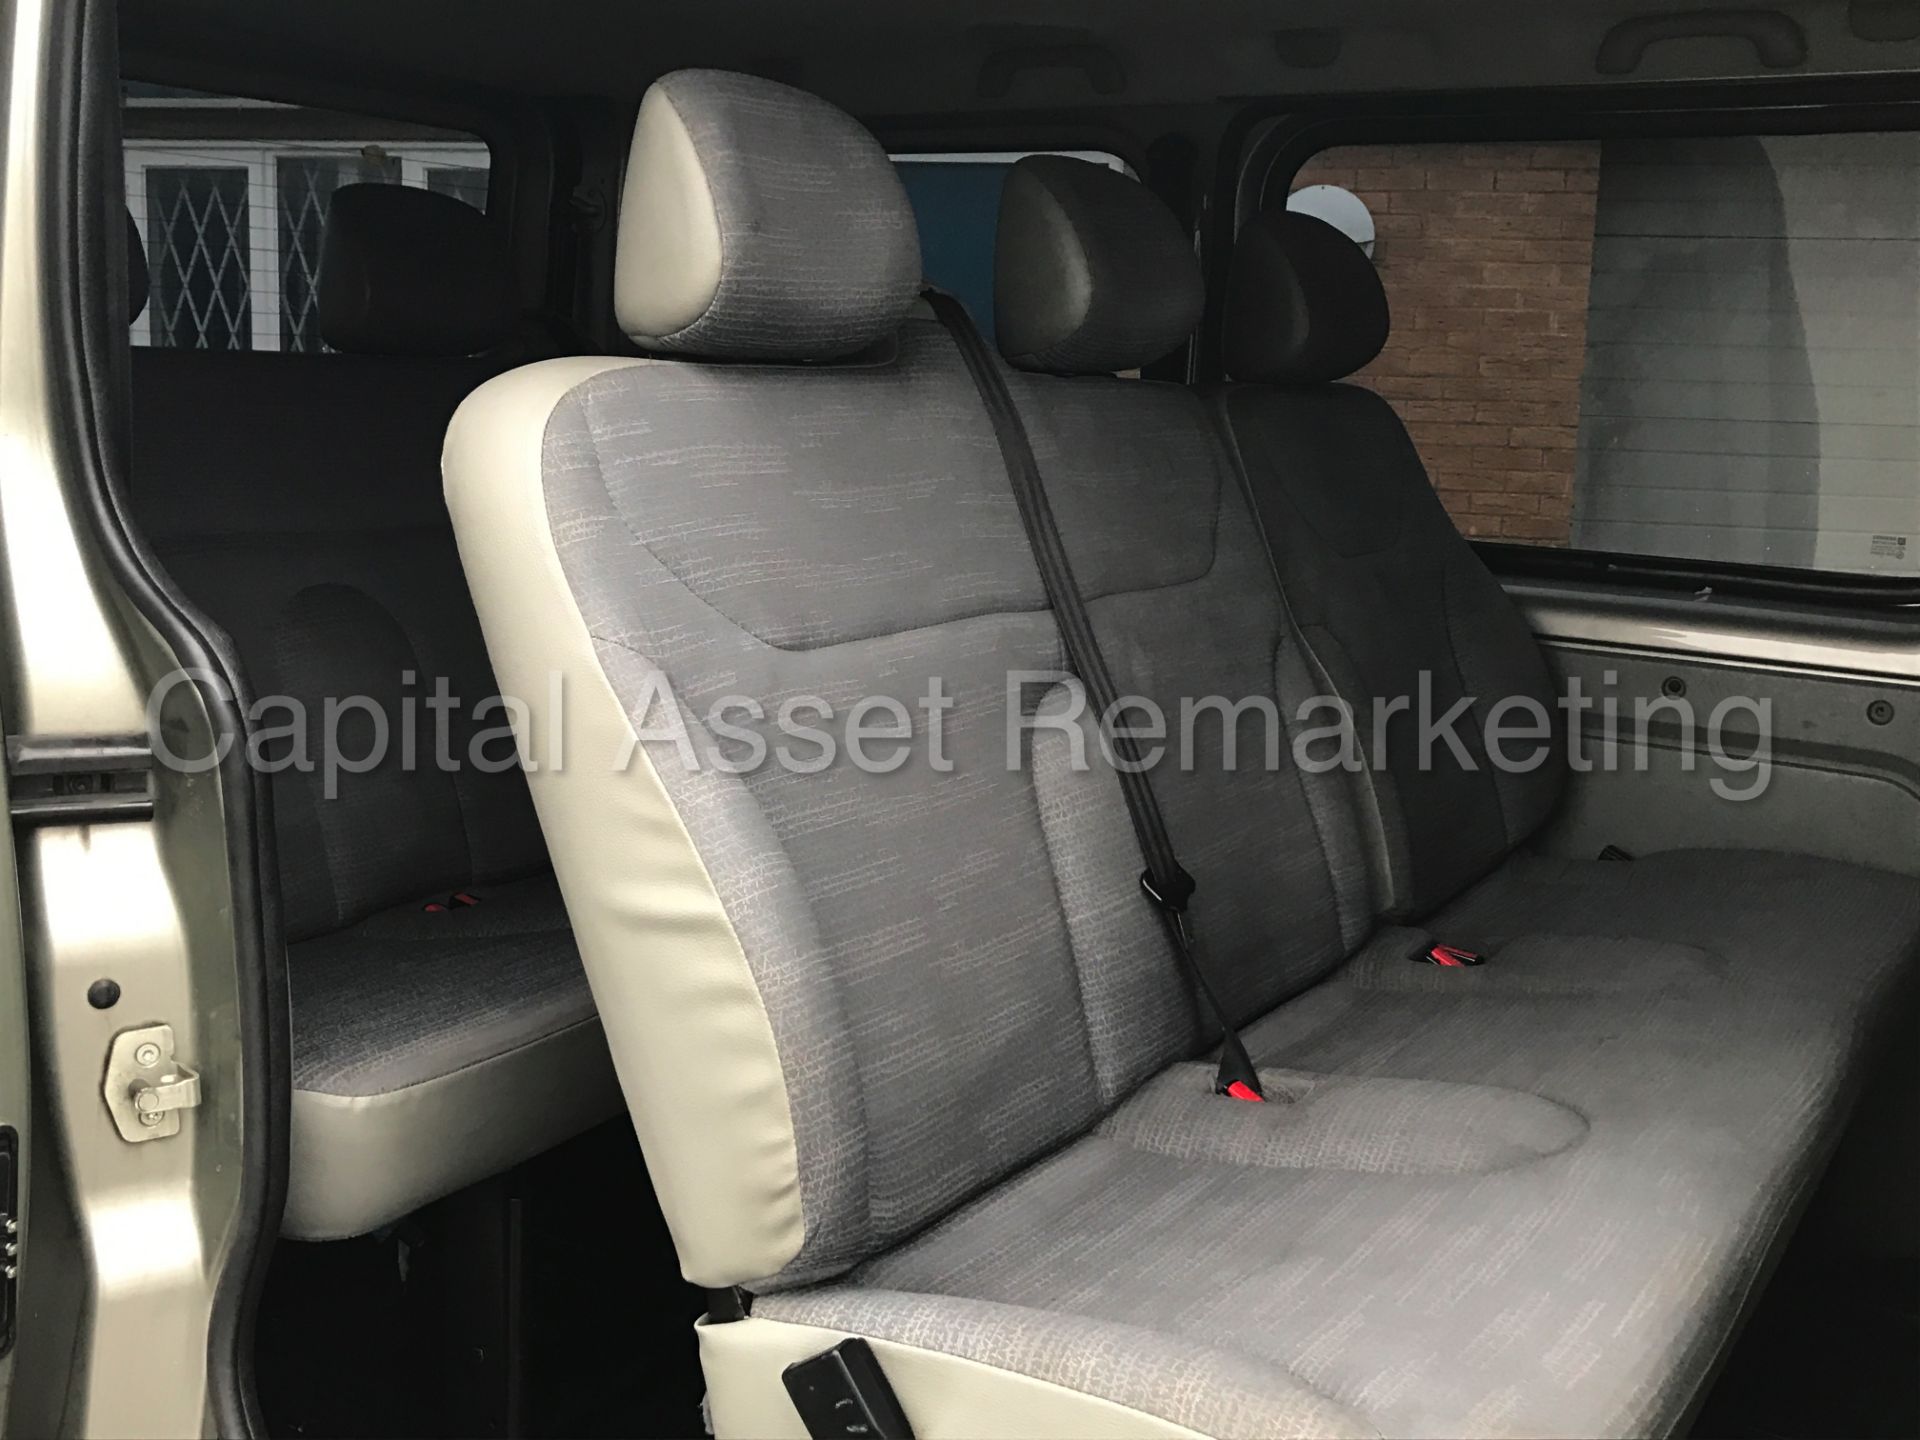 RENAULT TRAFIC SL29 '9 SEATER BUS' (2007) '1.9 DCI - 115 PS - 6 SPEED - A/C' (NO VAT - SAVE 20%) - Image 14 of 26